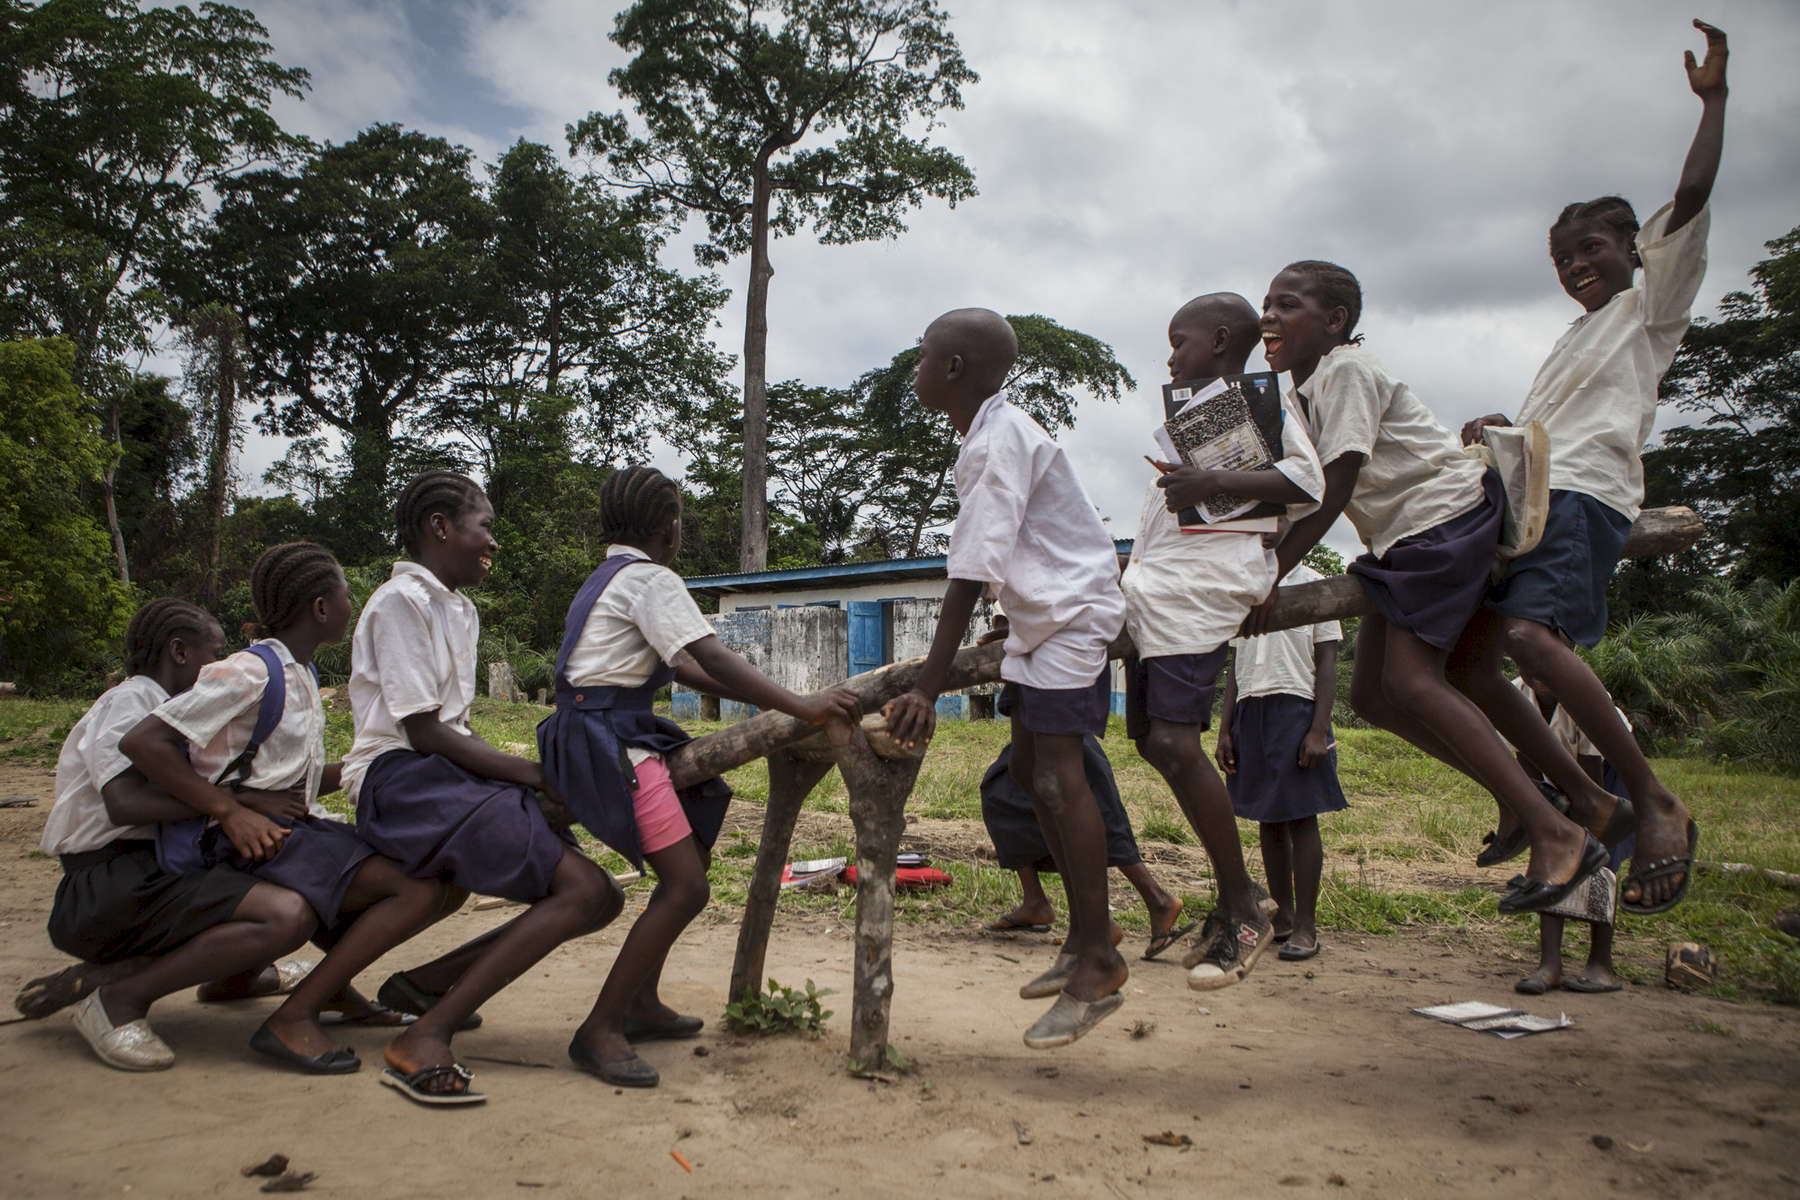 Students play on the playground at the Passama Public School in Gbarnga, Bong County, Liberia